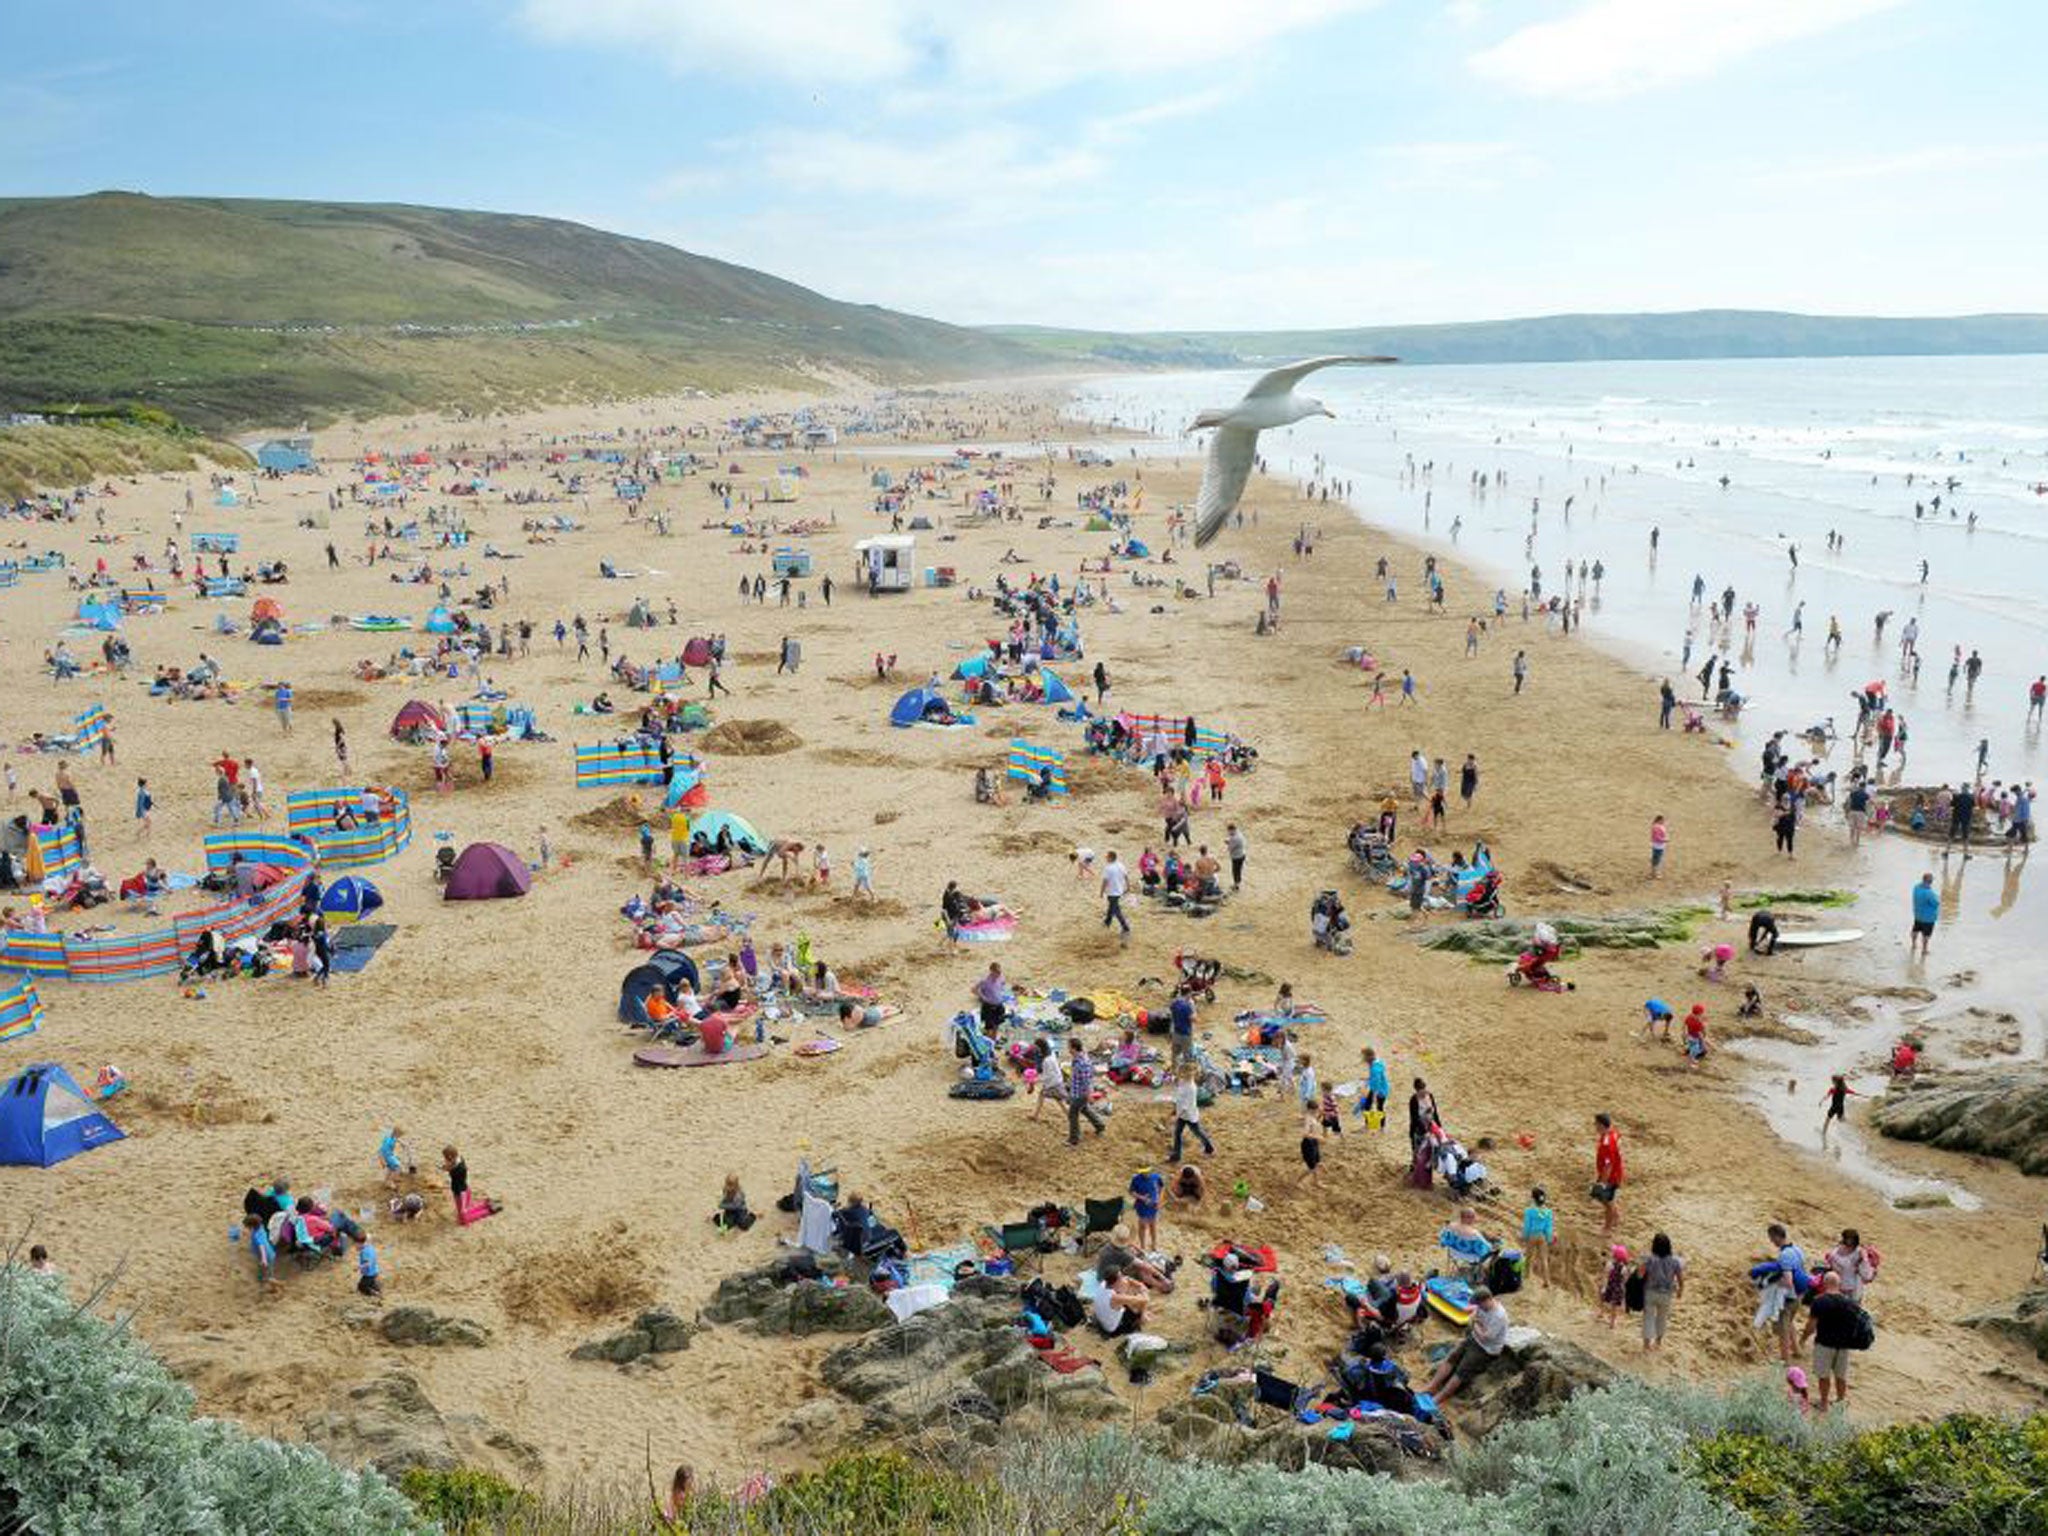 The Bank Holiday is gearing up for temperatures topping 20C